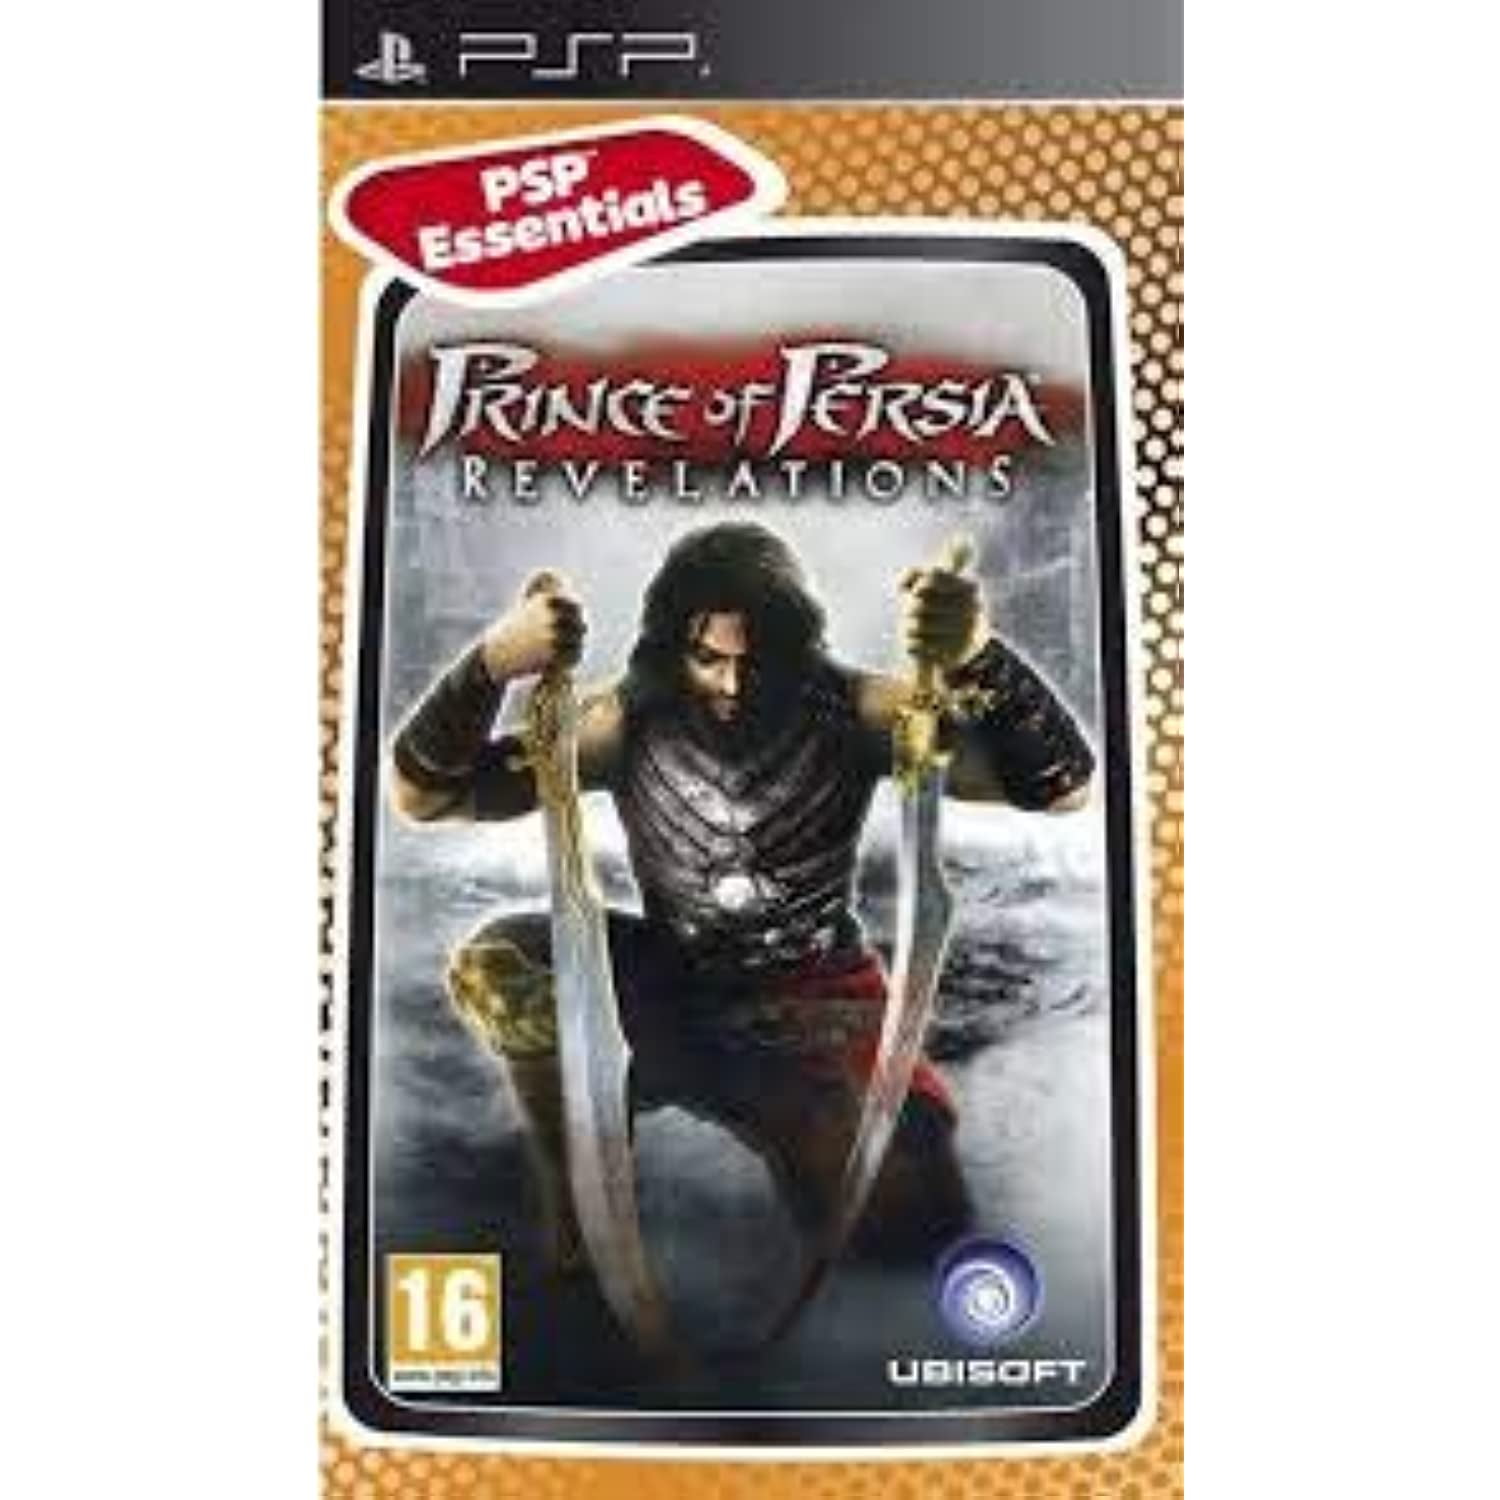 Prince Of Persia Revelations (Psp) 